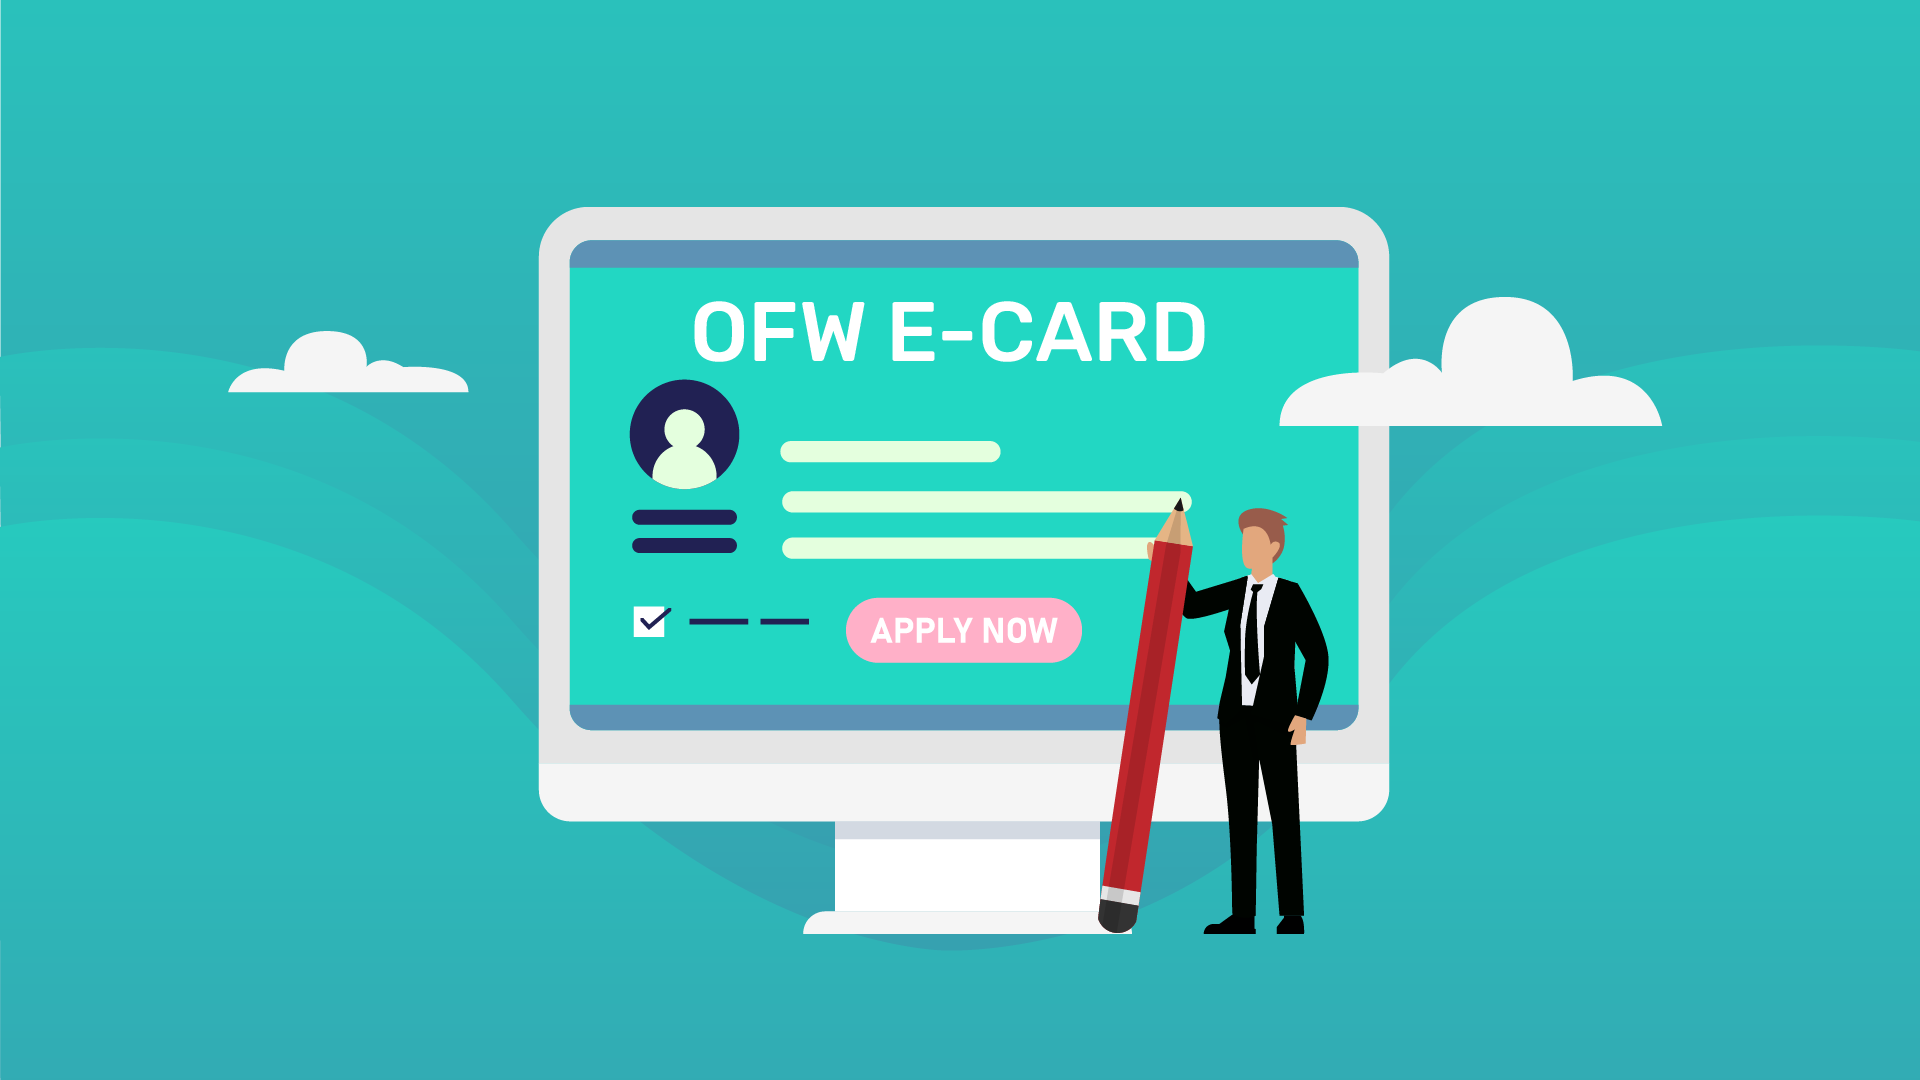 Illustration portraying the OFW eCard application process